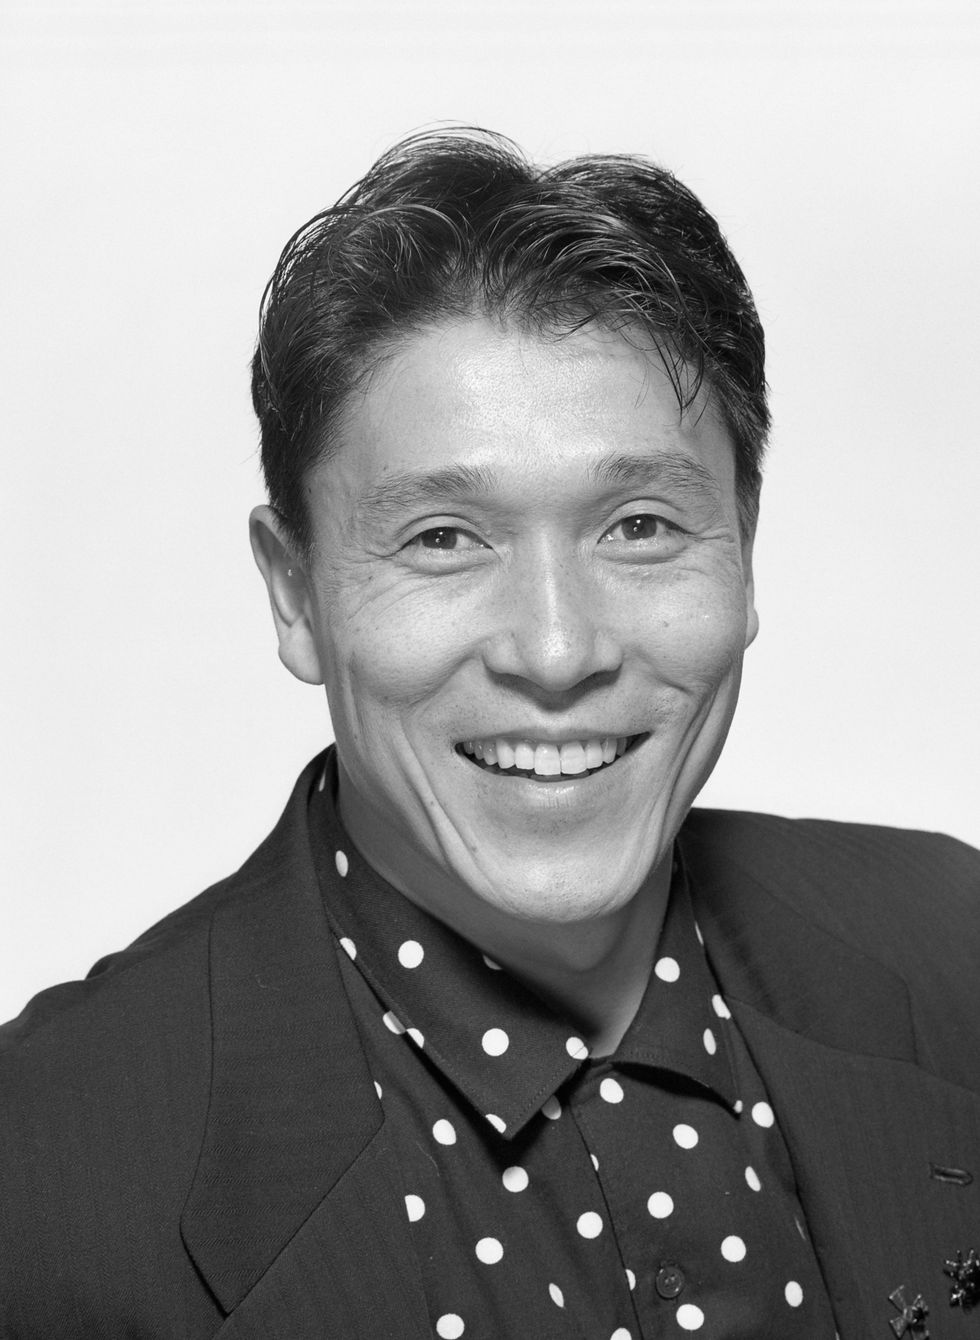 A black-and-white headshot of Masazumi Chaya. He is an Asian man and is wearing a suit jacket and polka dot dress shirt.